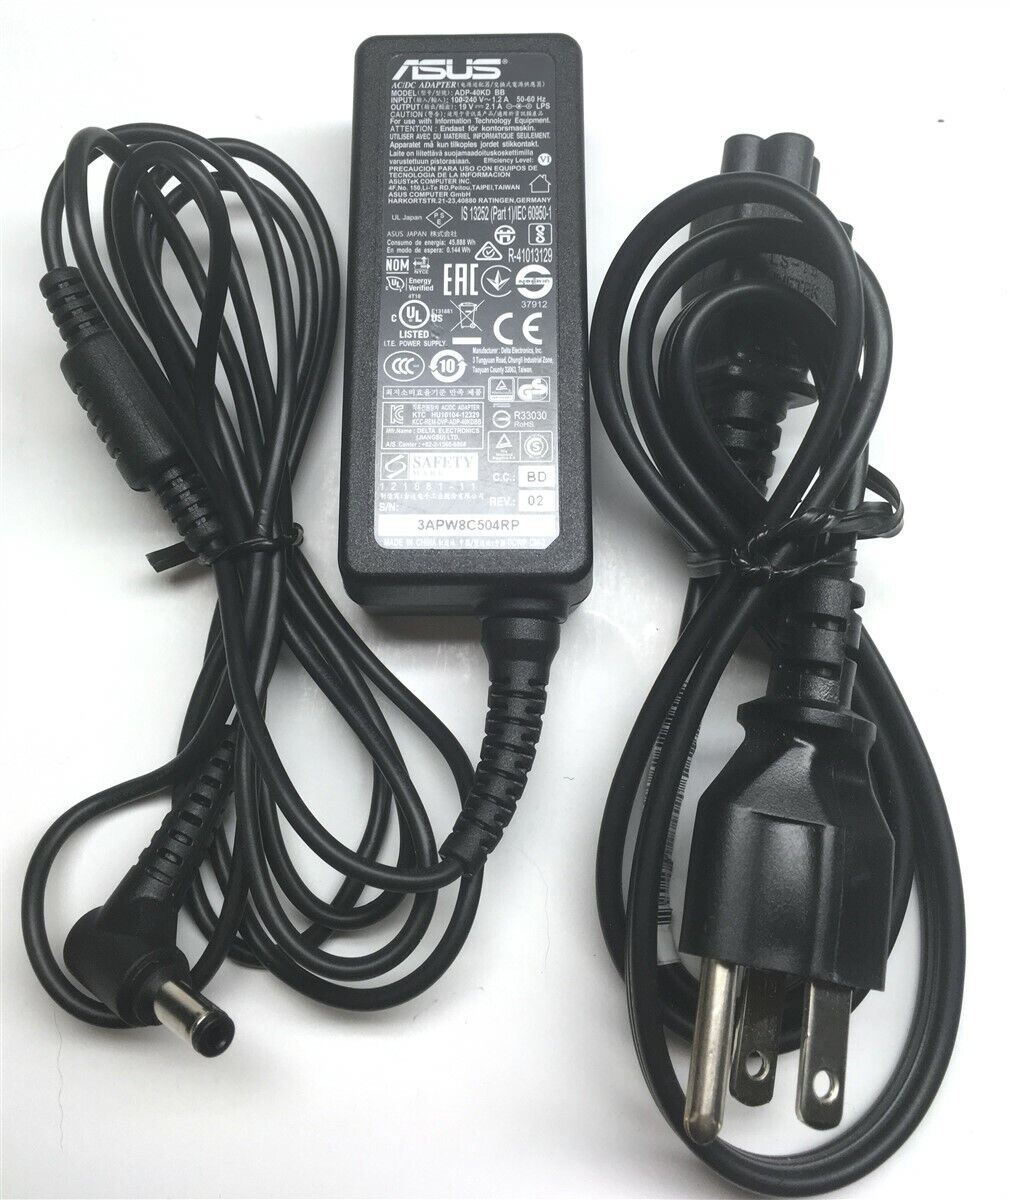 Genuine Asus Monitor Charger AC Adapter Power Supply ADP-40KD BB CC BD 5.5mm Tip